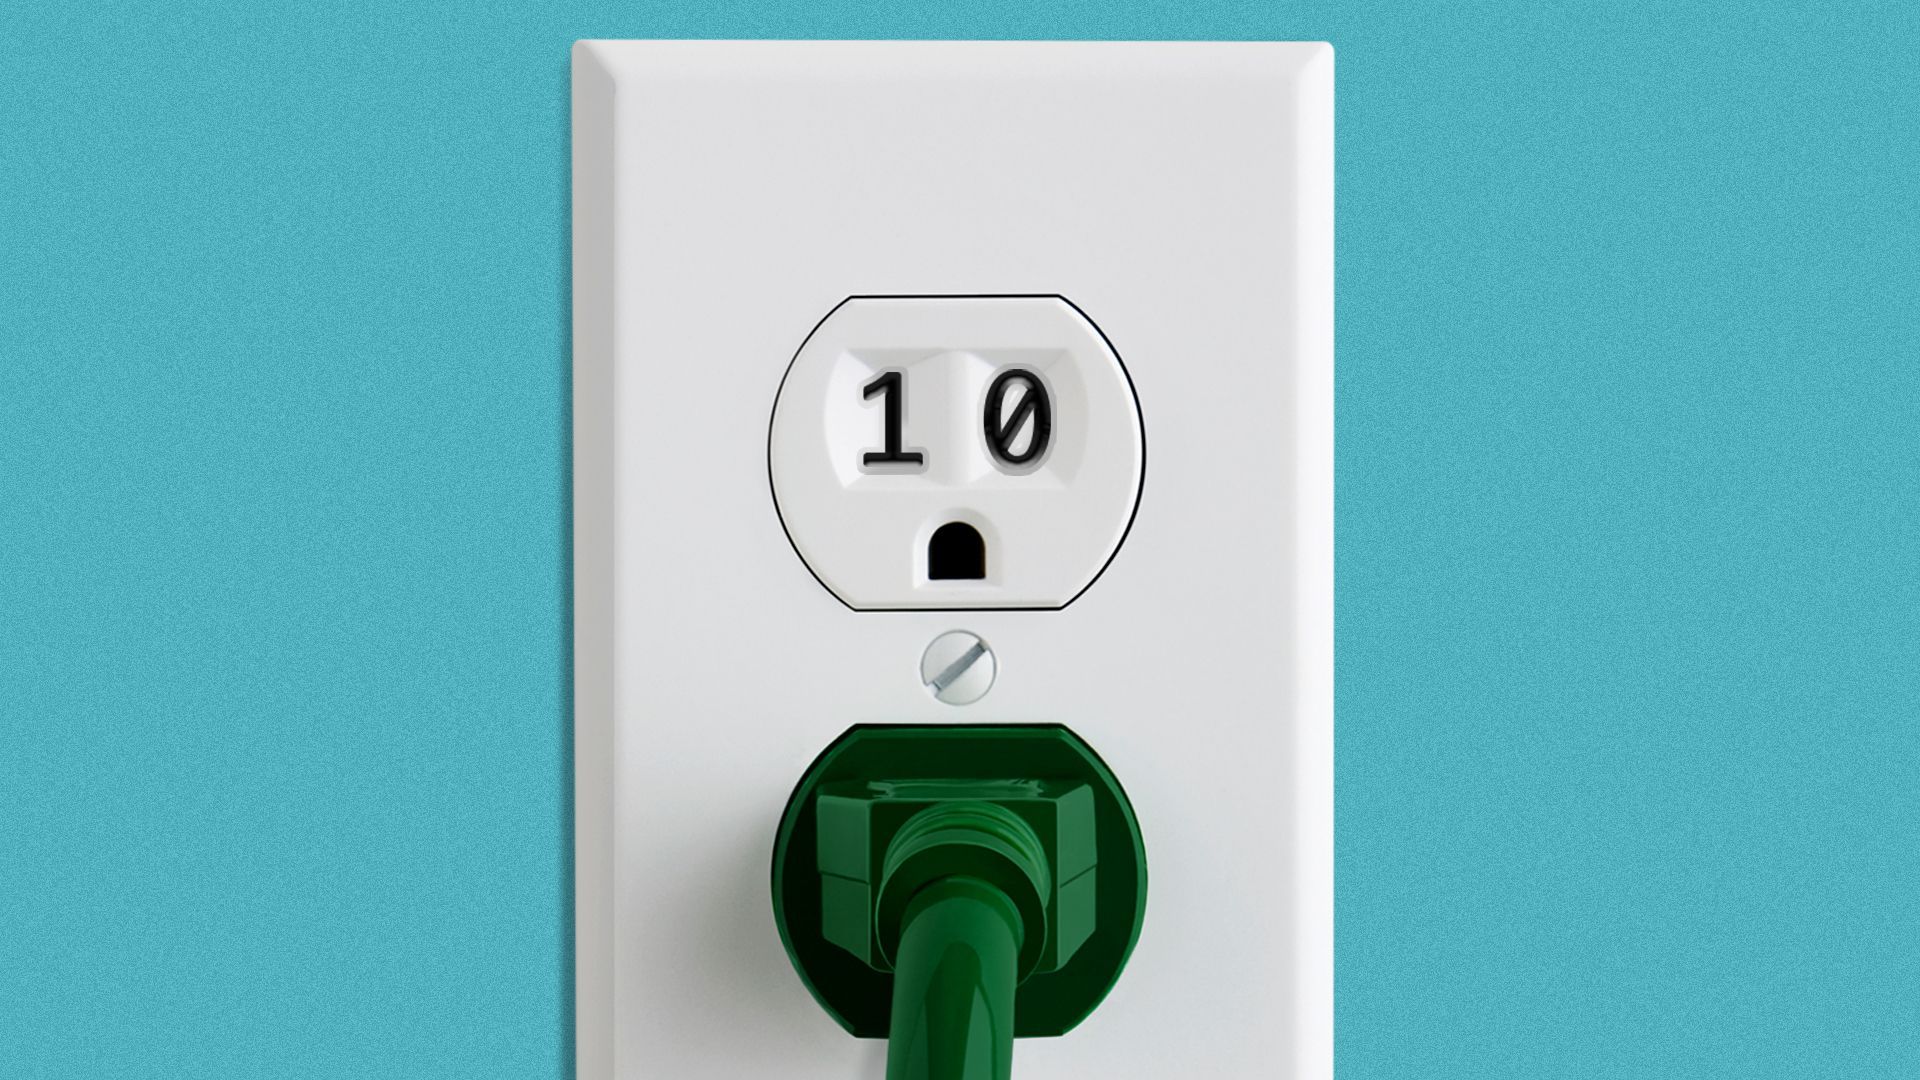 Illustration of an electrical outlet with a 1 and zero for holes